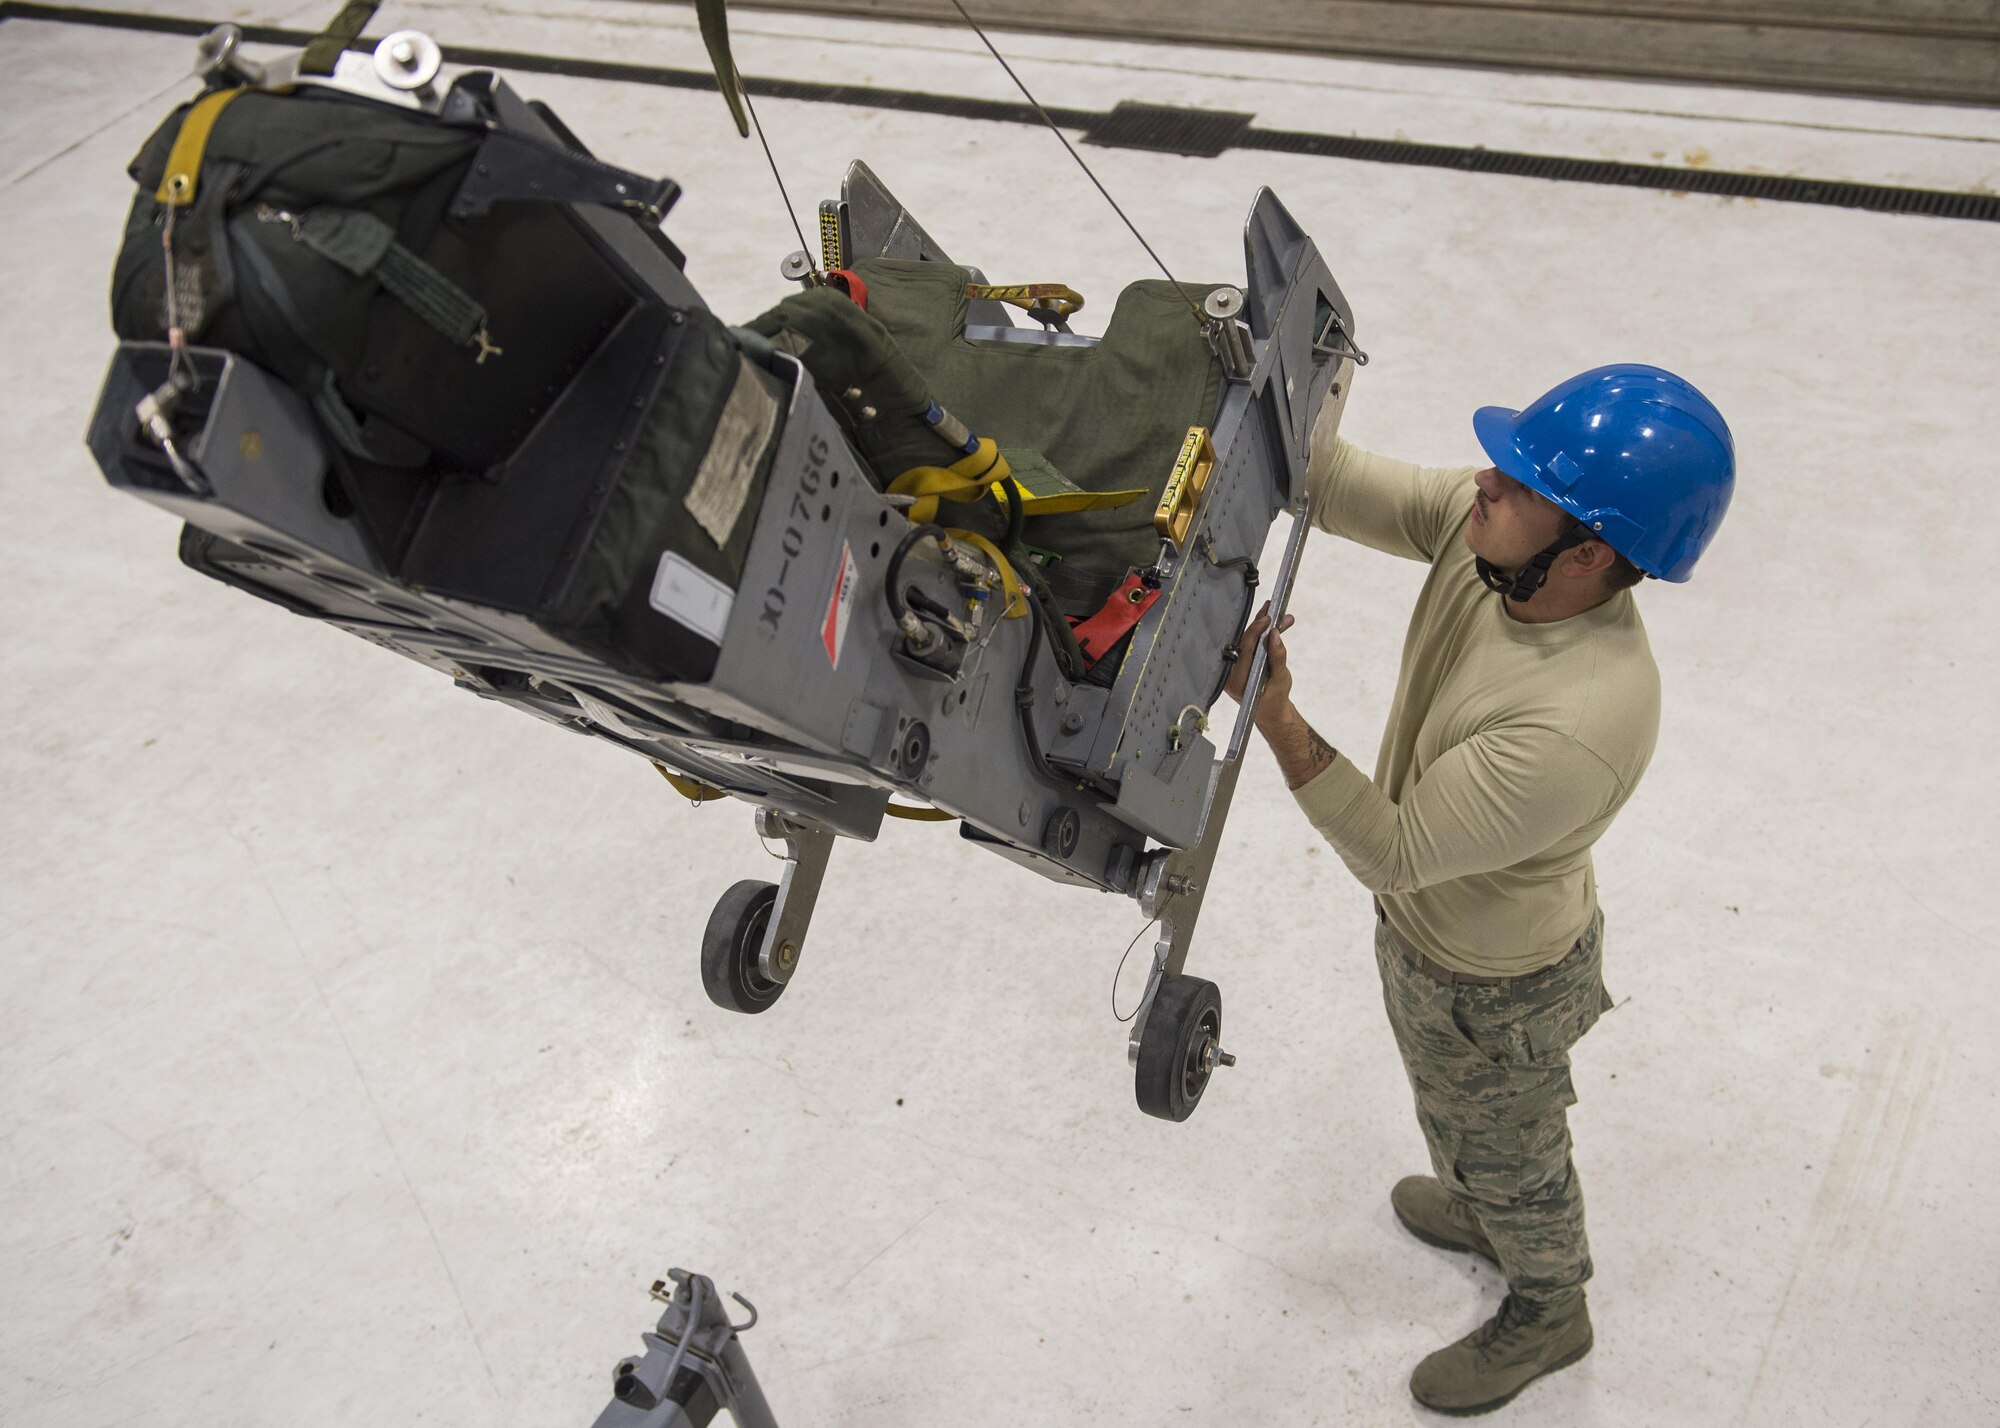 Airman 1st Class Steven Phelps, a 54th Maintenance Squadron egress systems journeyman, removes the ejection seat of an F-16 Fighting Falcon on March 13, 2017 at Holloman Air Force Base, N.M. Egress specialists work hand-in-hand with Aircrew Flight Equipment to ensure pilots have the necessary equipment in case of an emergency. (U.S. Air Force photo by Senior Airman Emily Kenney)